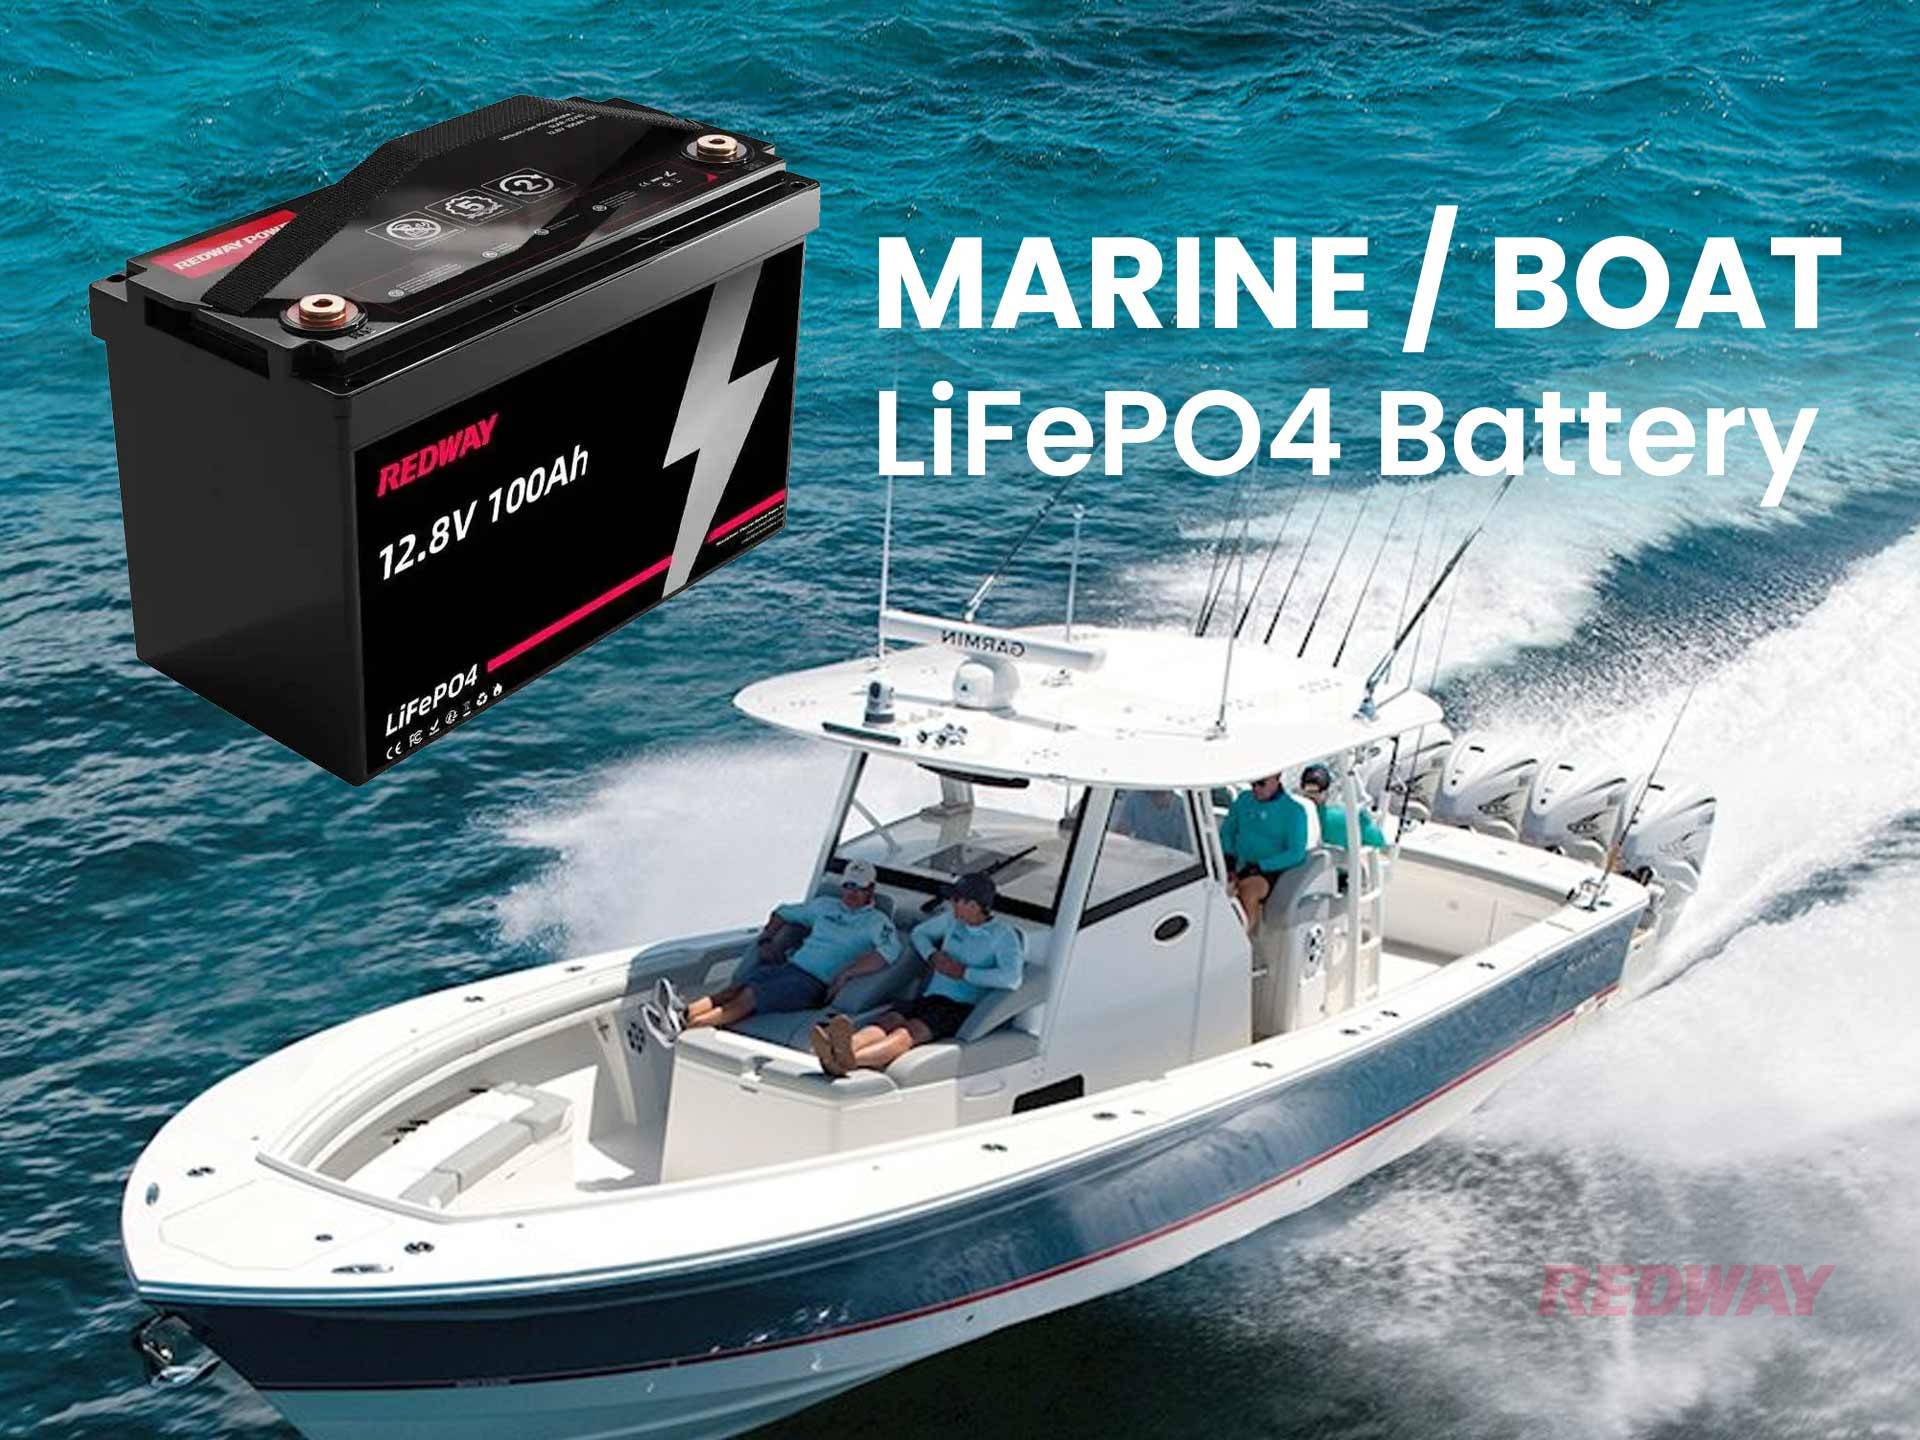 Emerging Trends in the APAC Marine Battery Industry